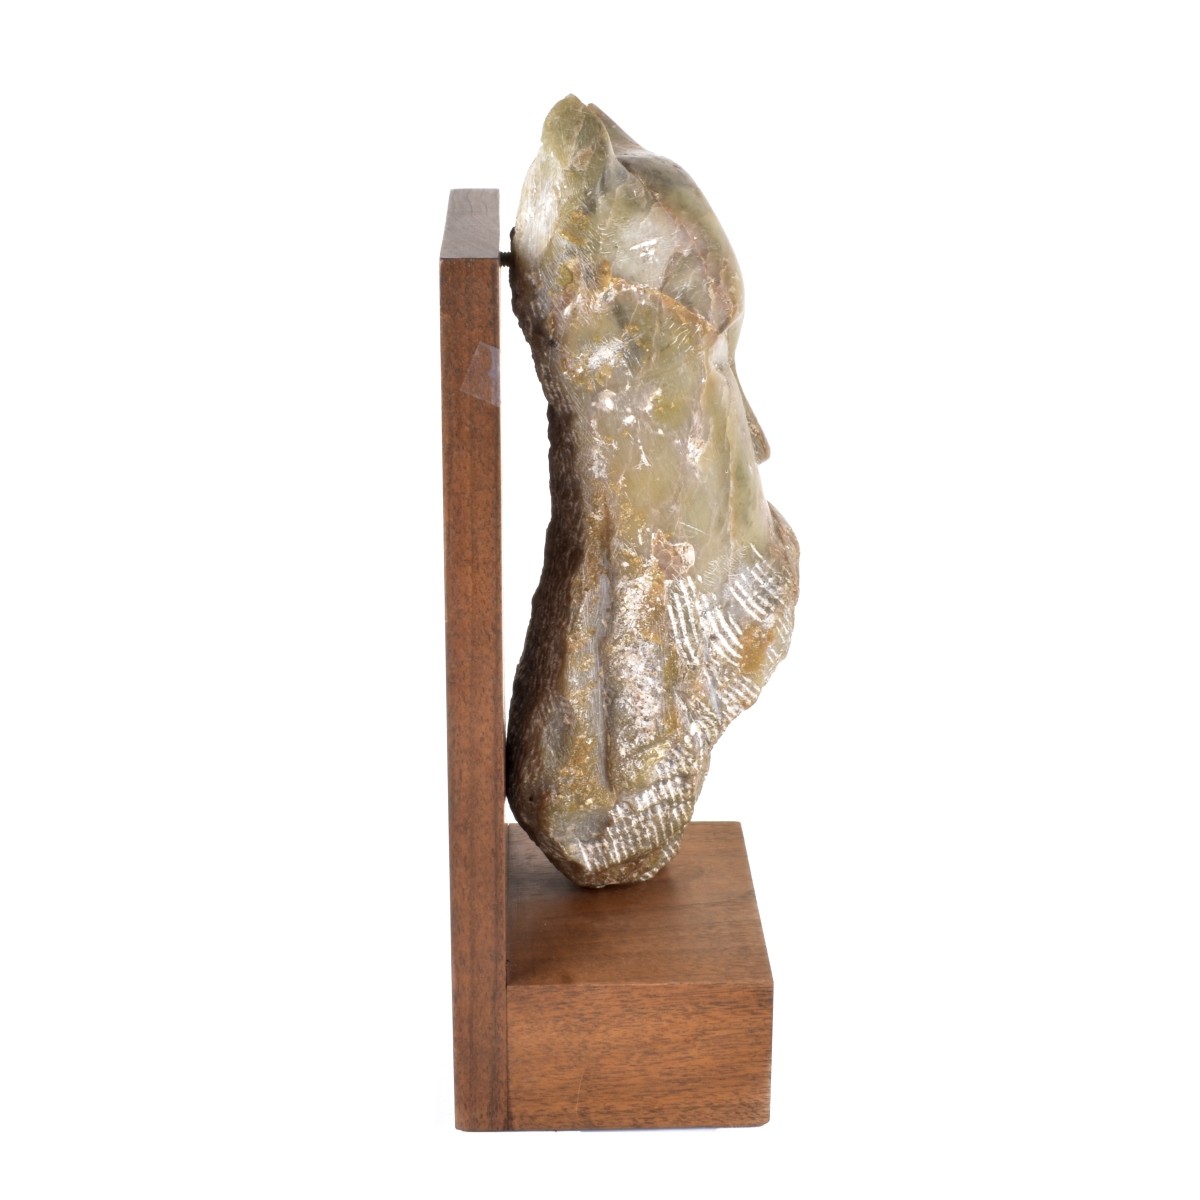 Marilyn Newman (20th Century) Marble Sculpture